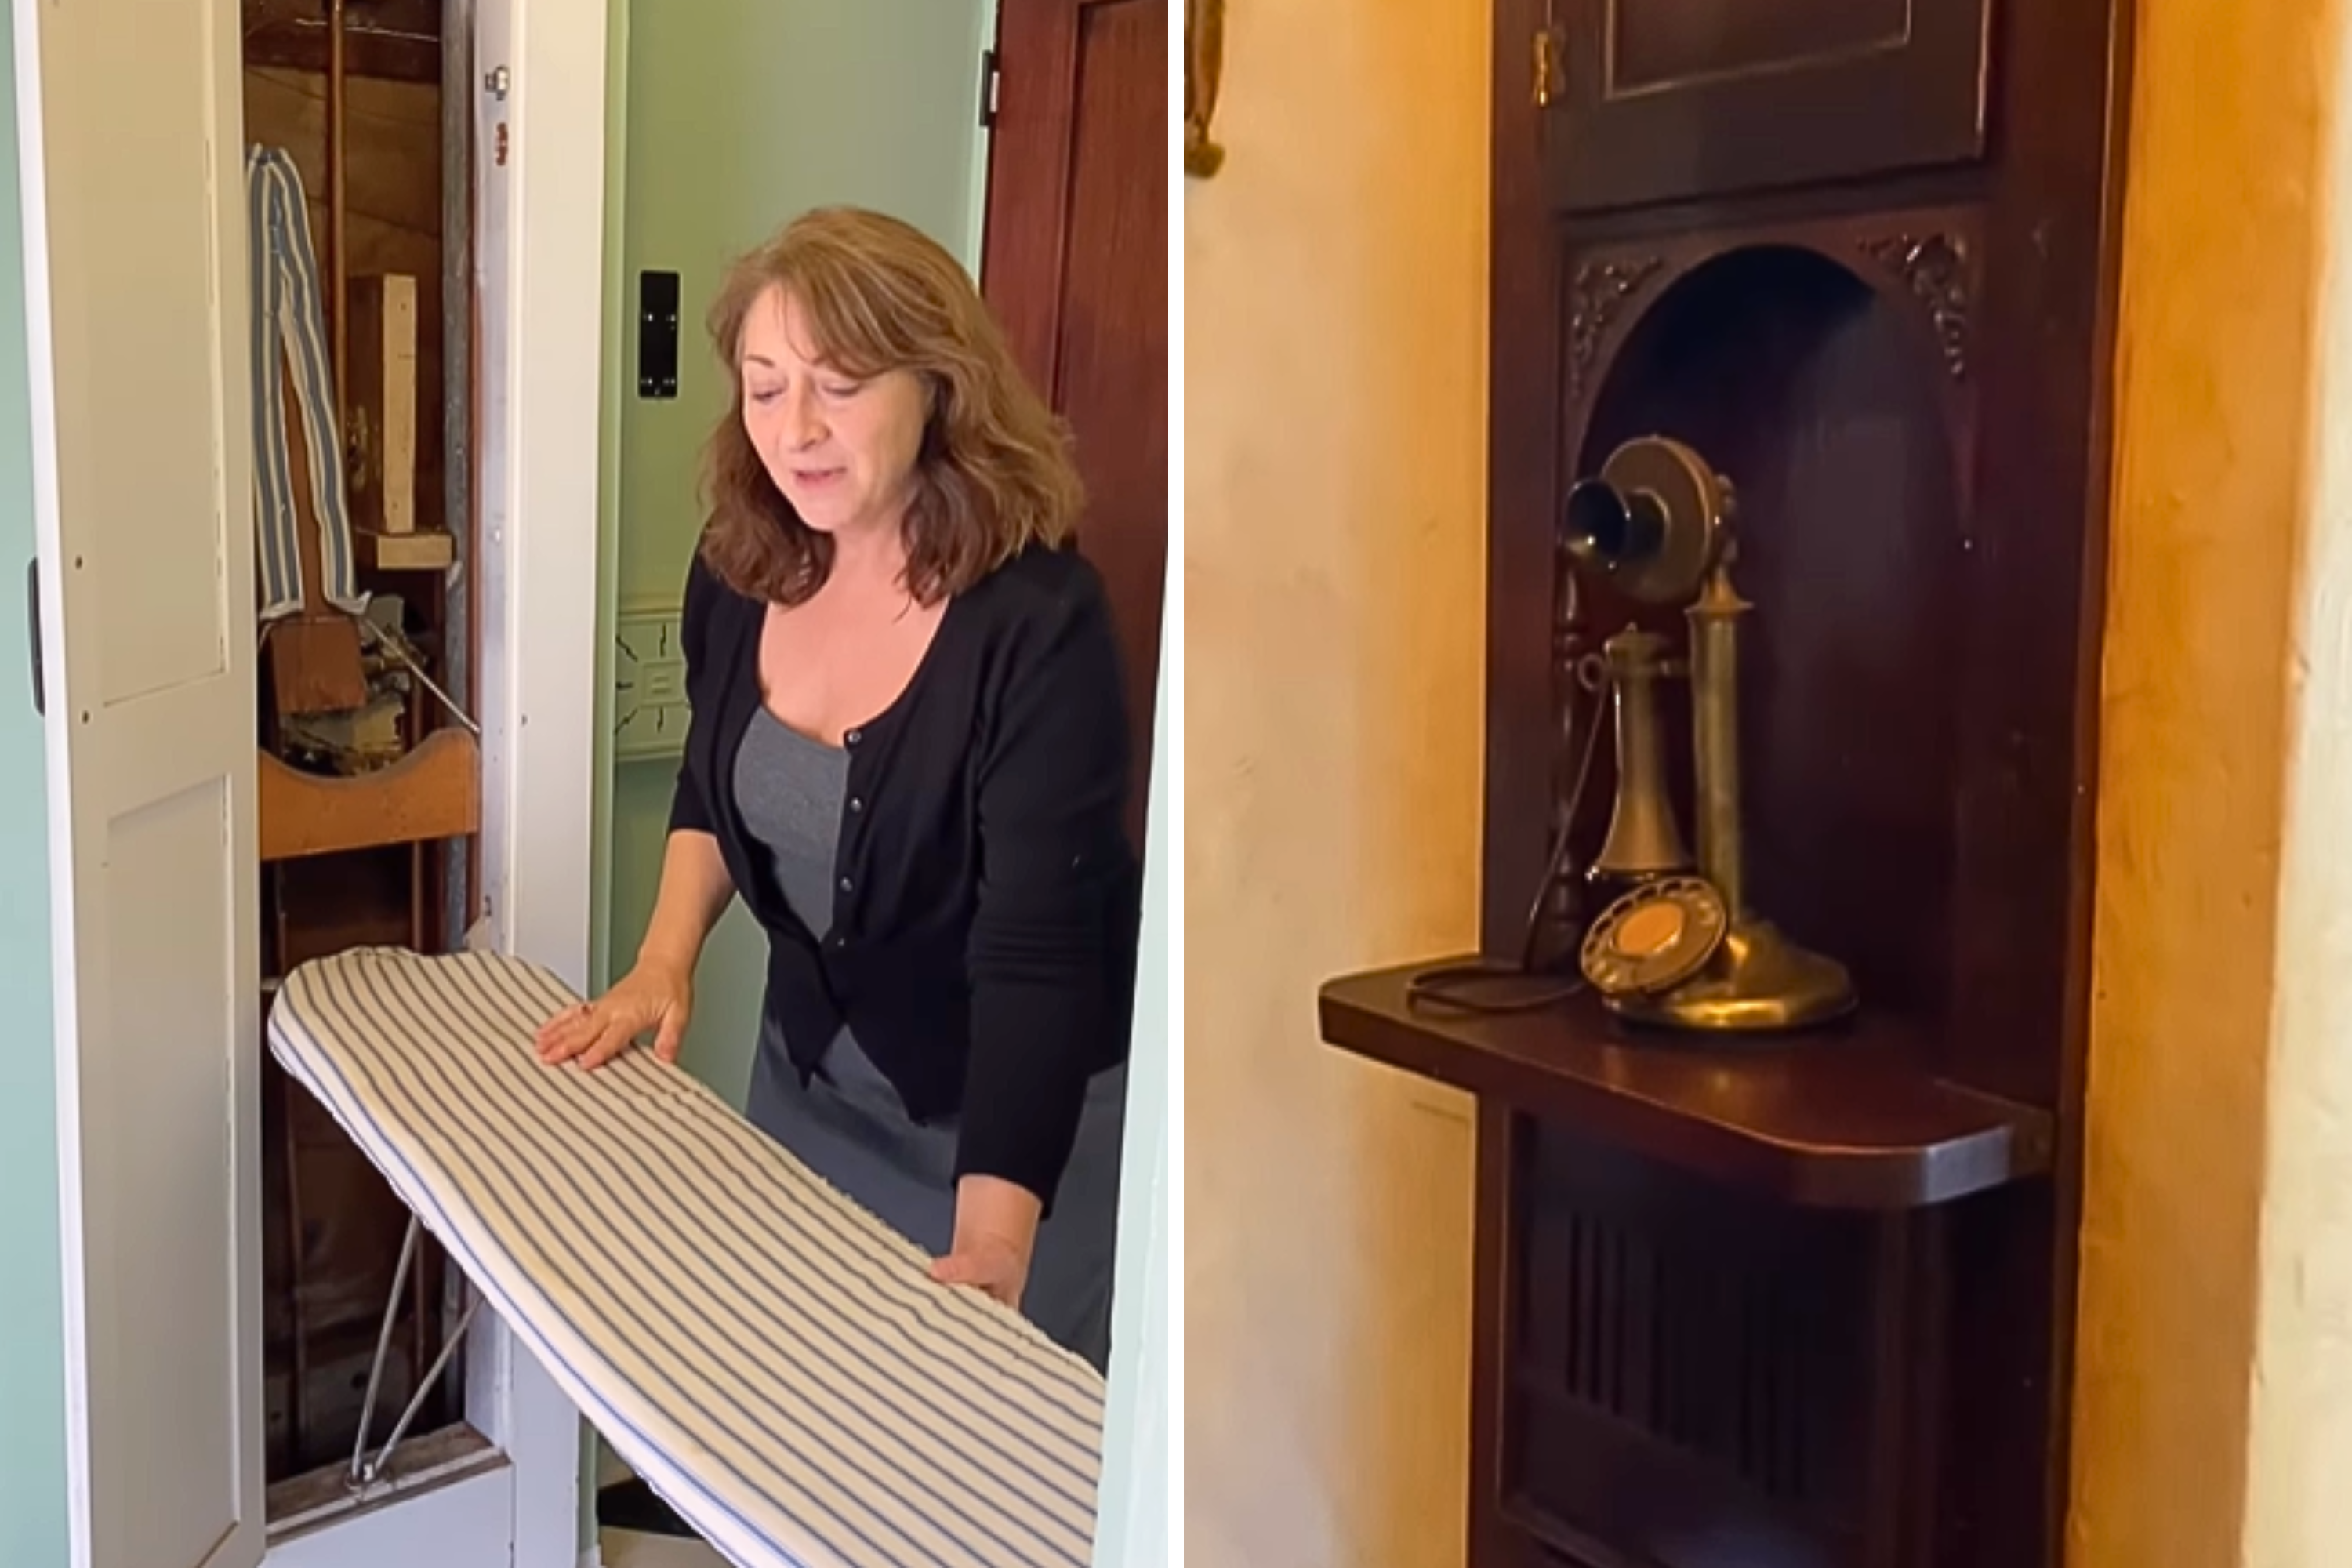 Realtor’s 1920s listing goes viral for unexpected “smart” features